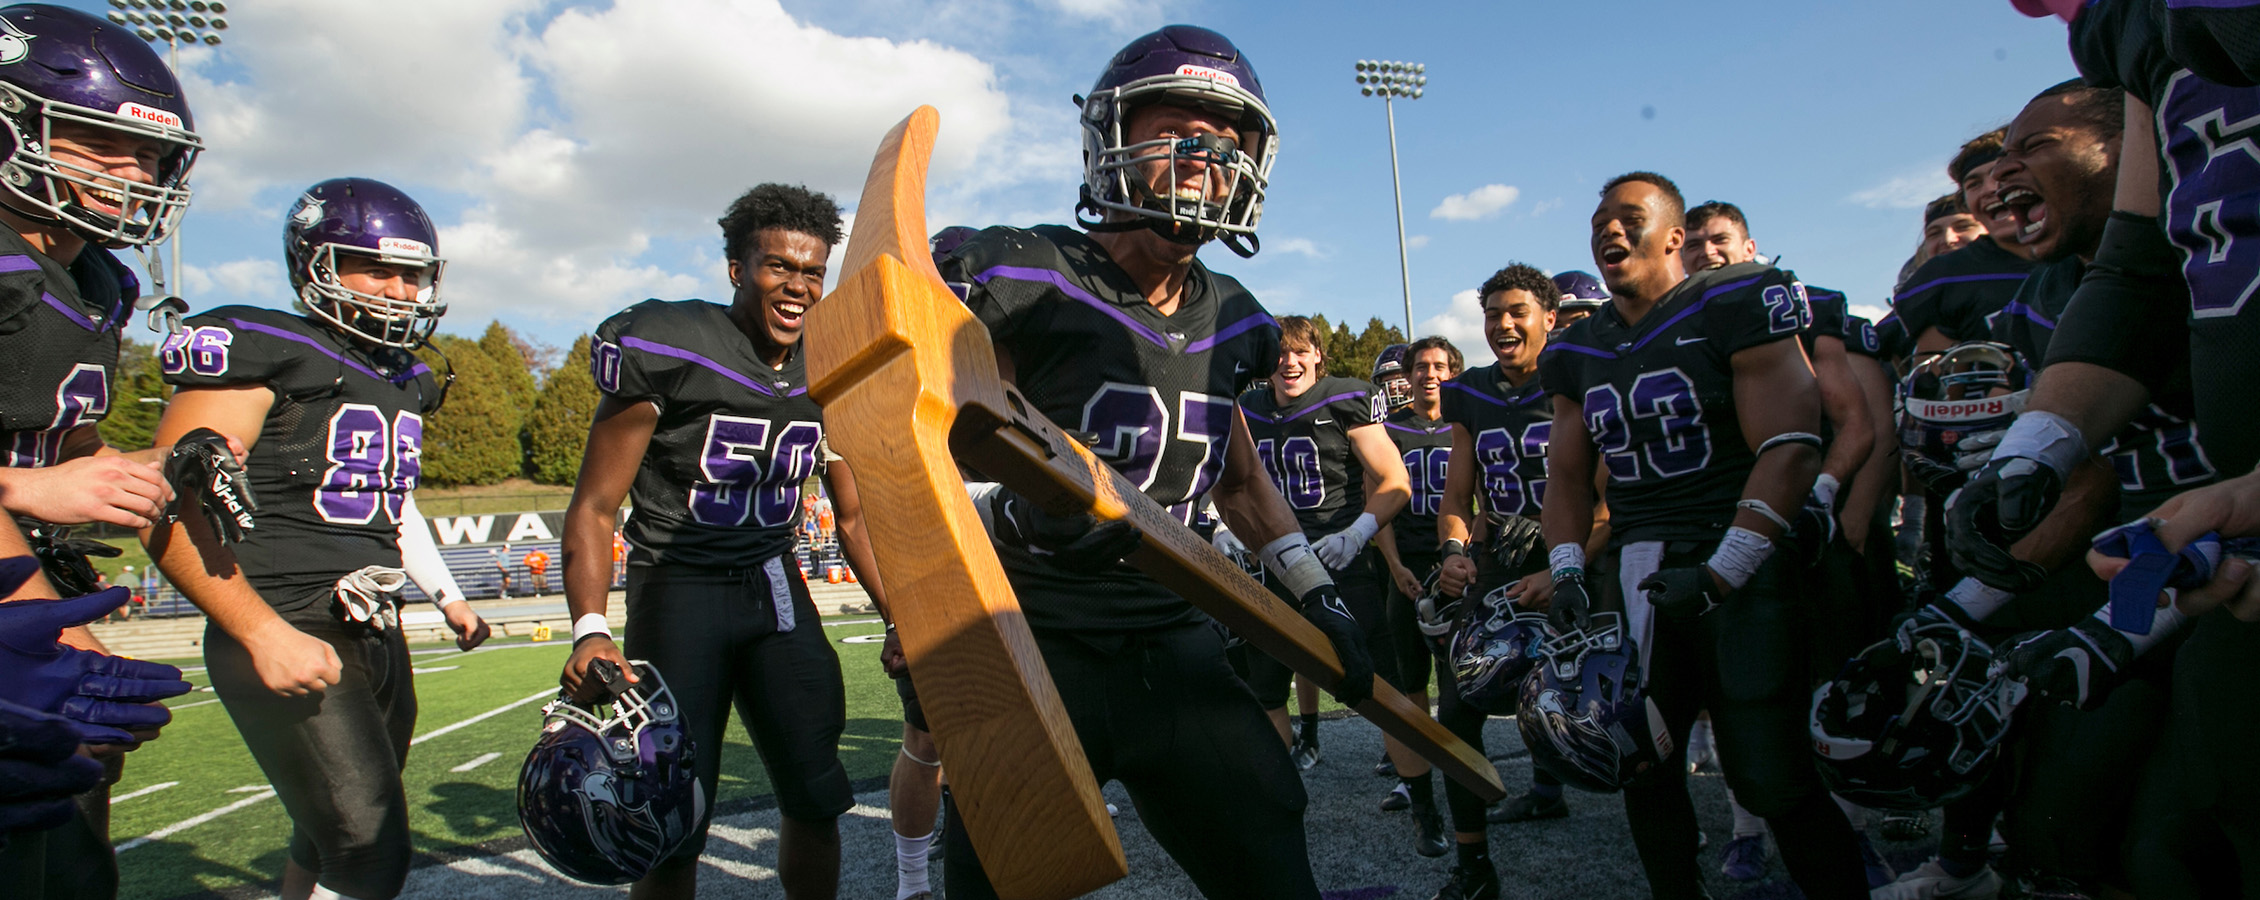 UW-Whitewater football players celebrate in their purple uniforms with a trophy